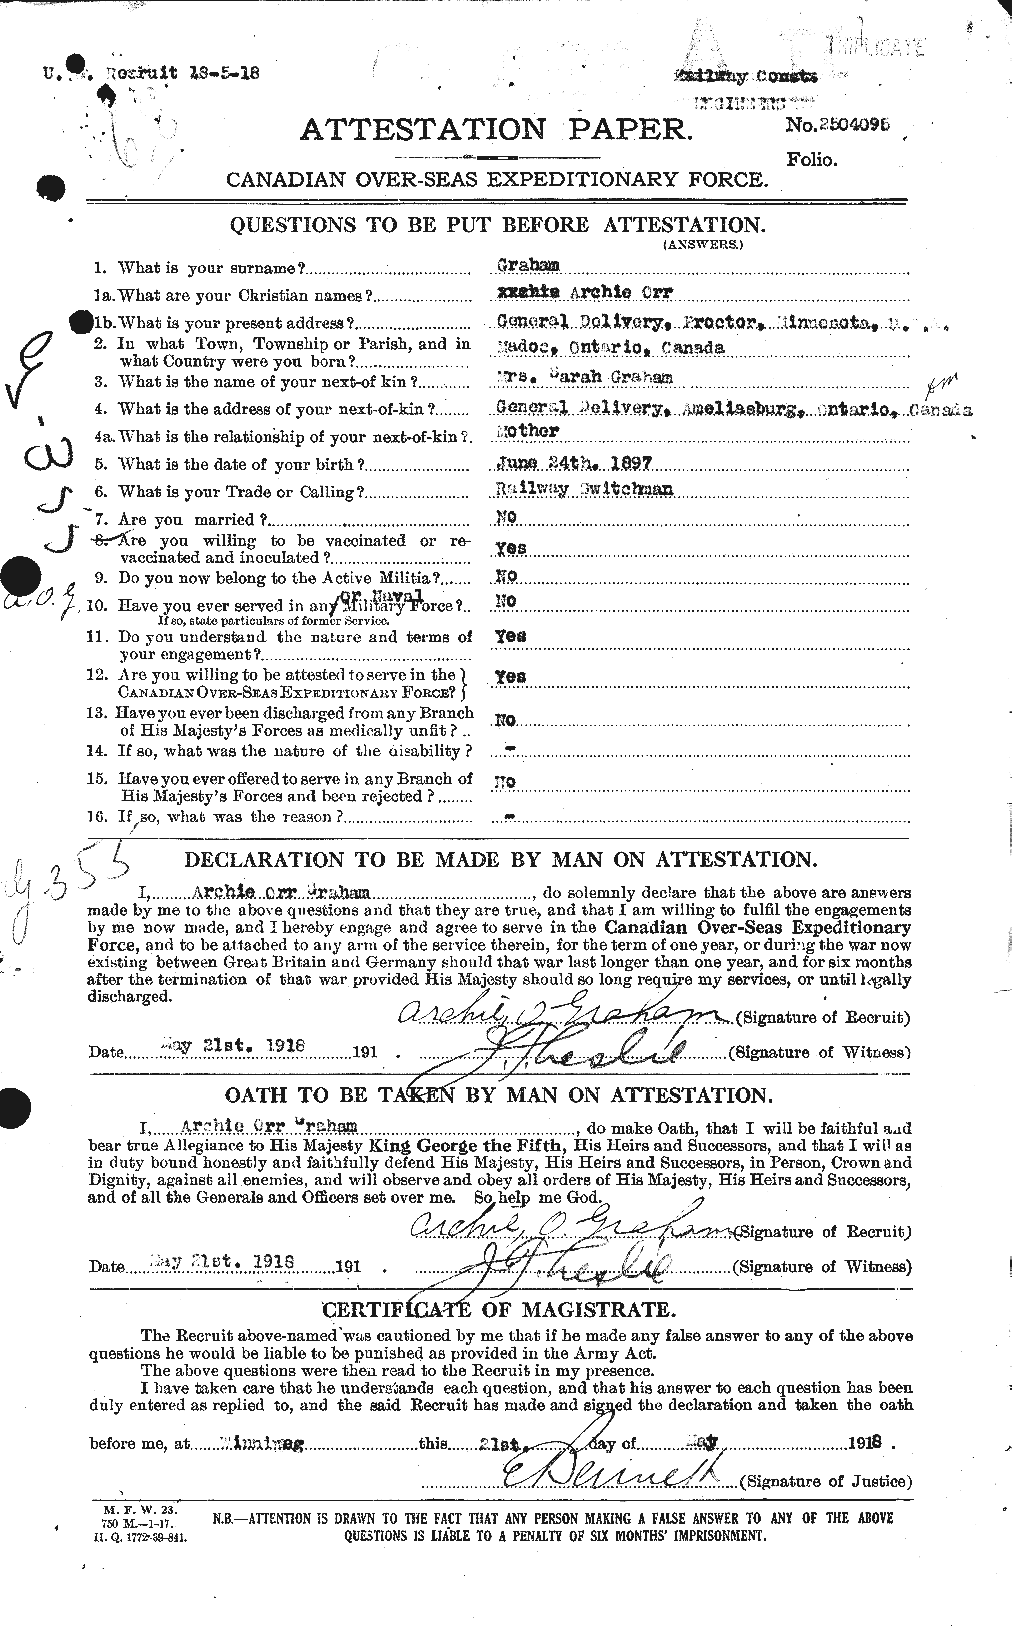 Personnel Records of the First World War - CEF 359645a